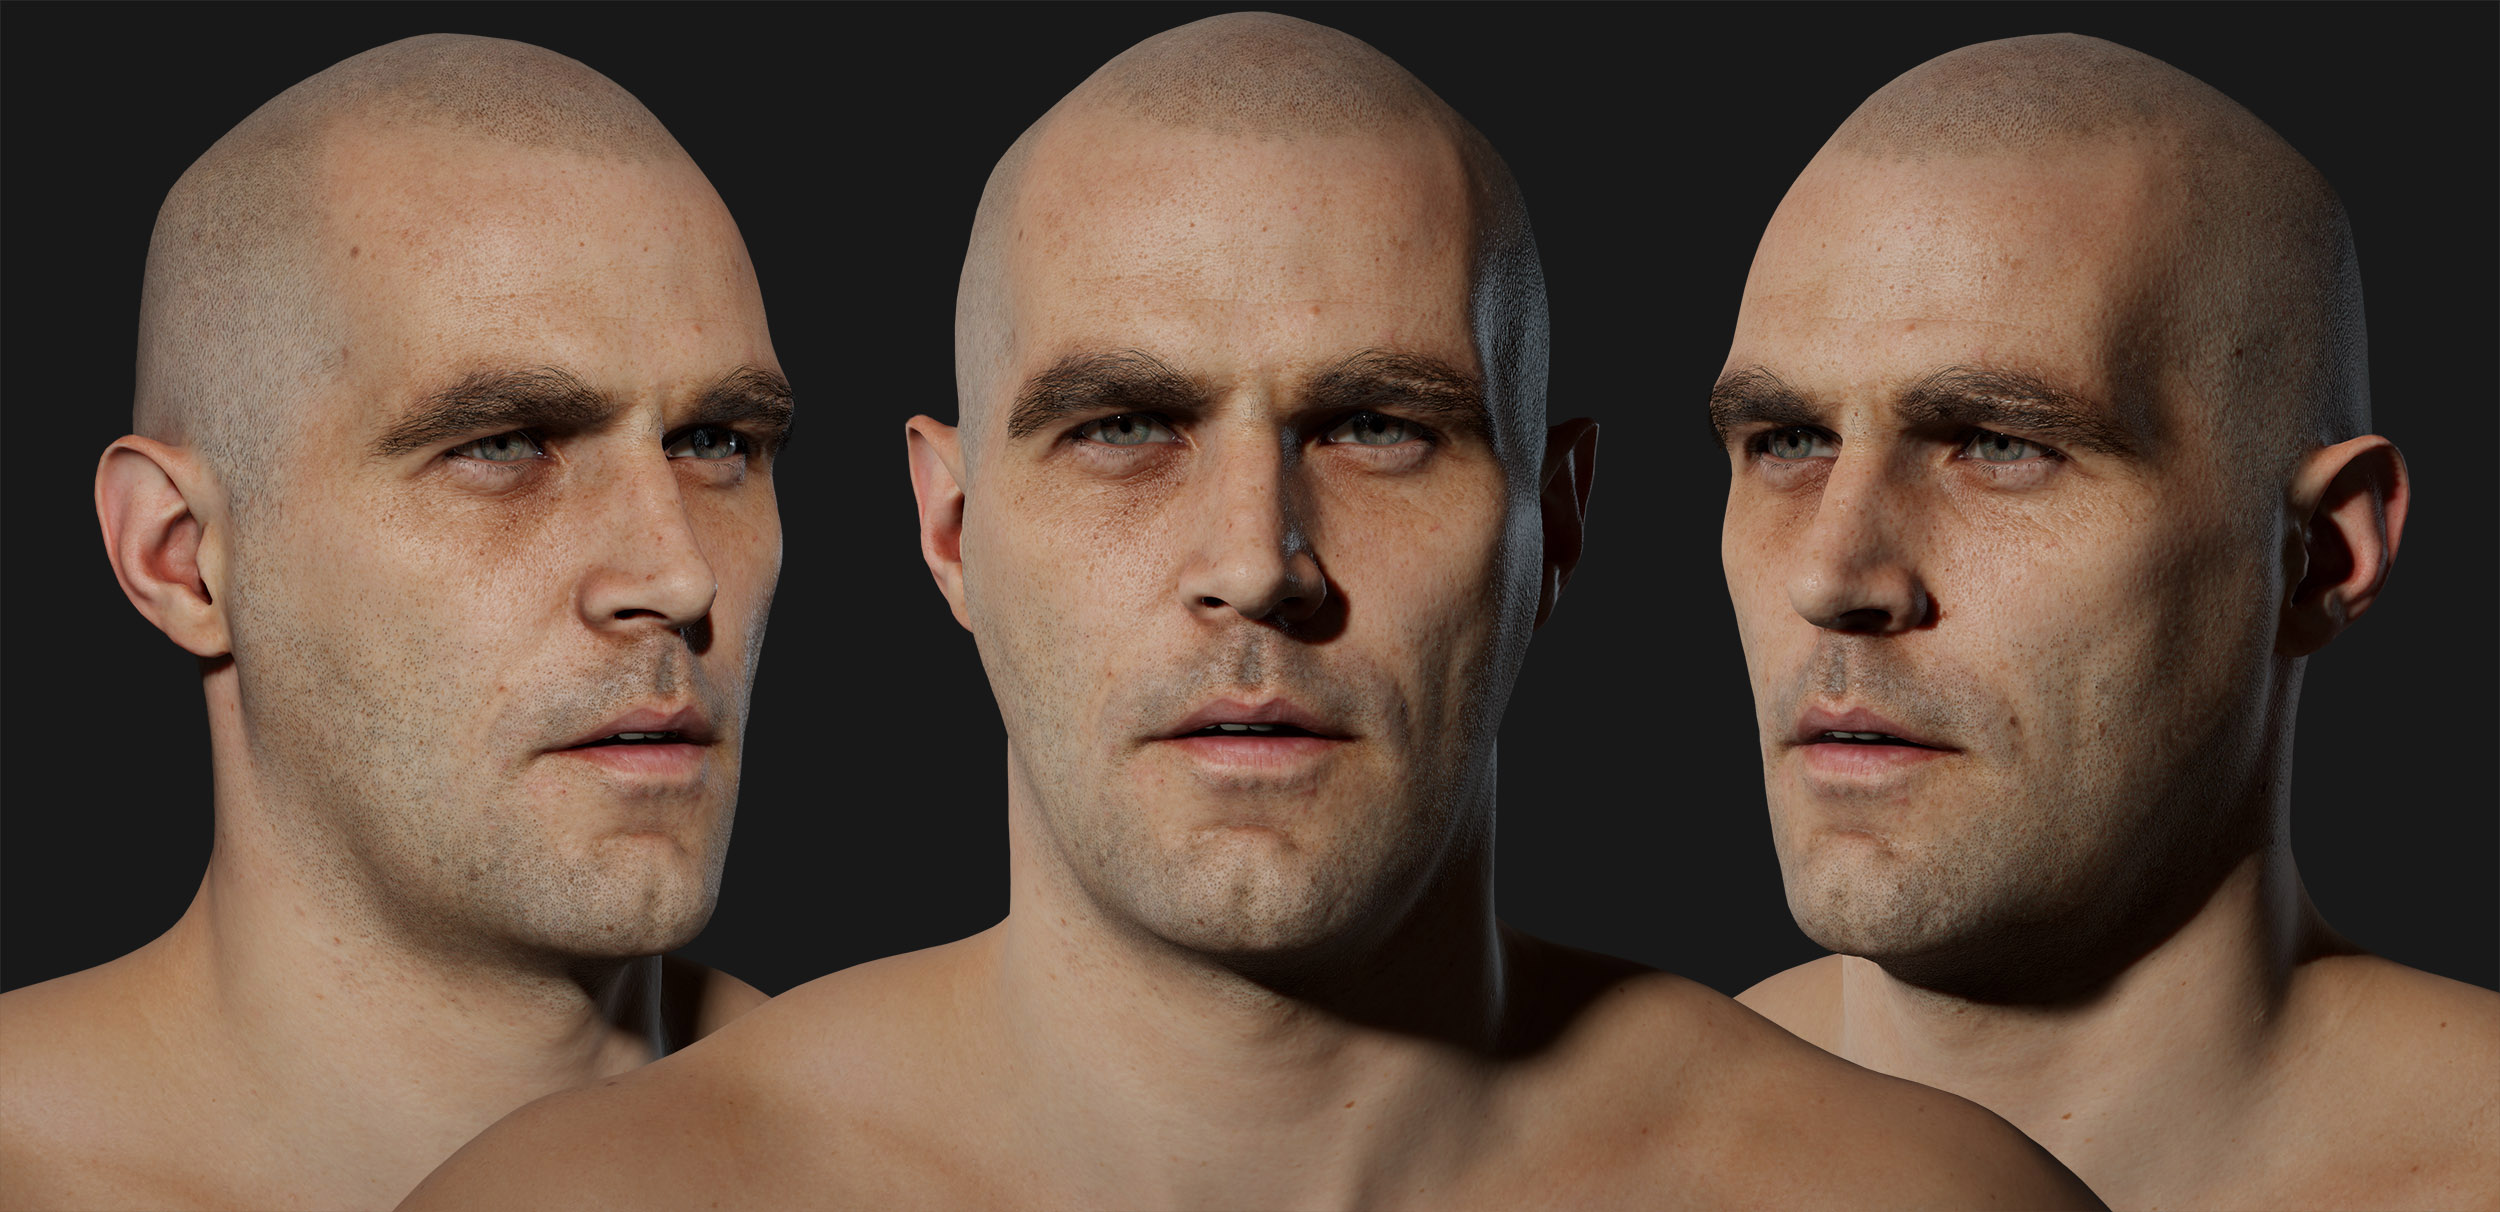 Rugged male 3D photogrammetry videogame model 